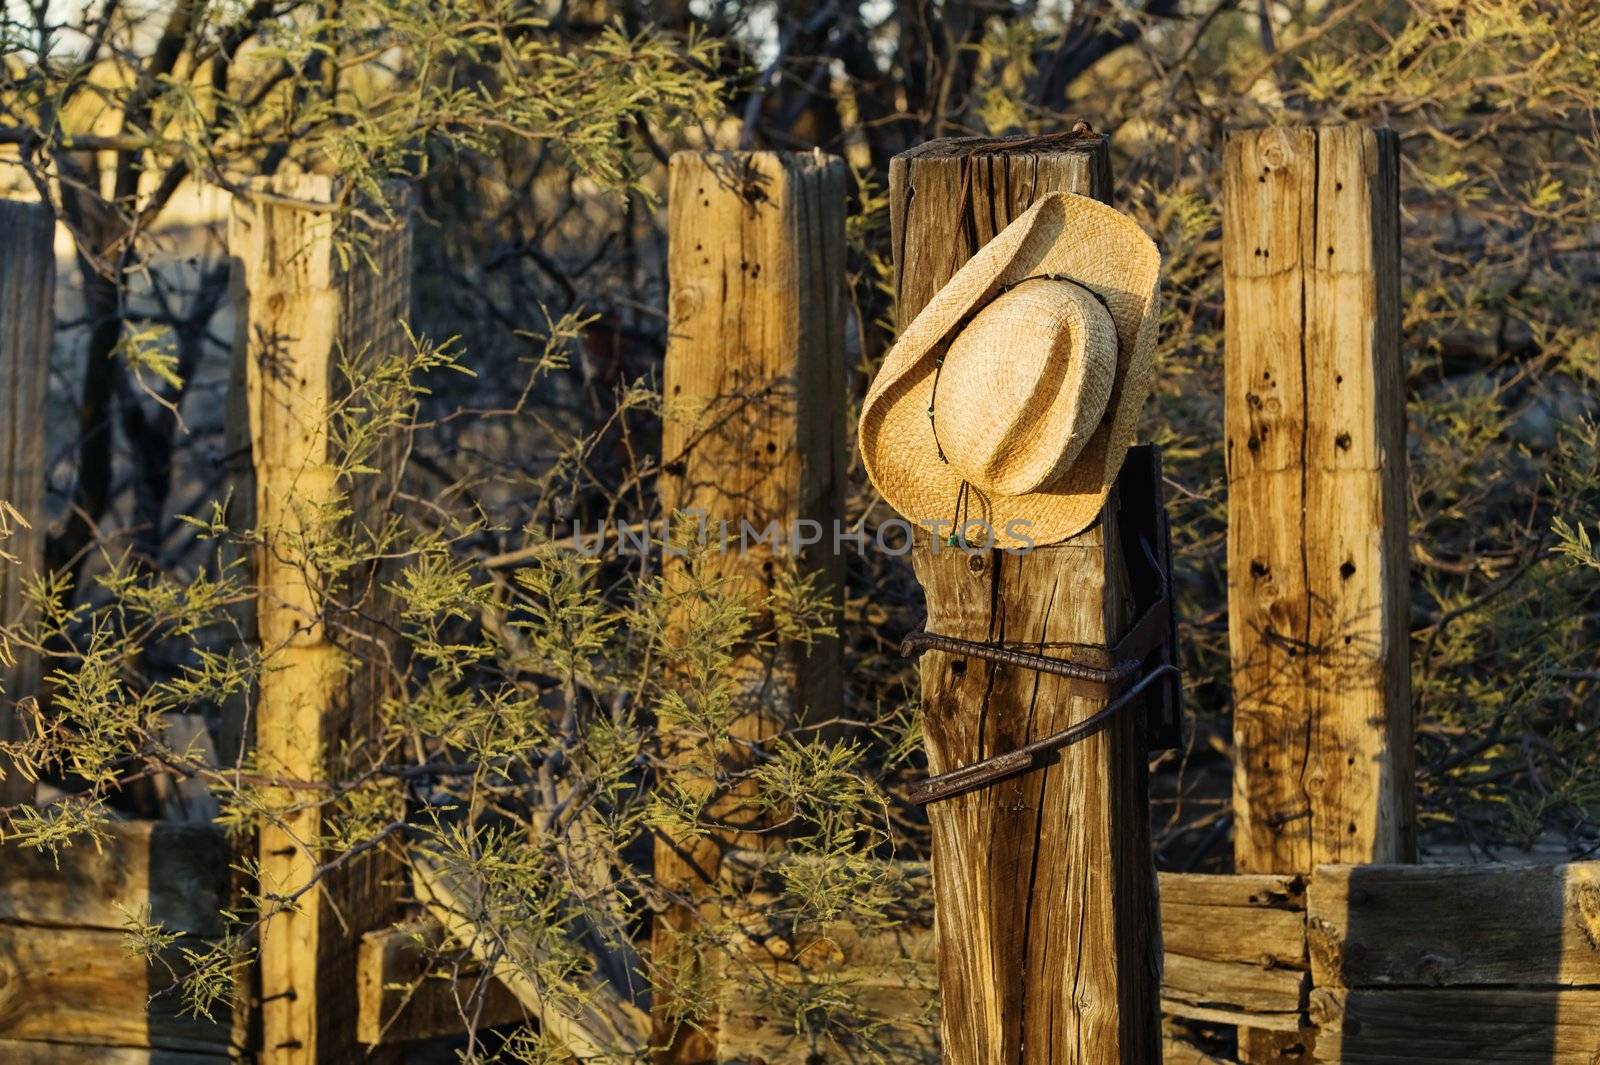 Cowboy Hat on a Post by Creatista